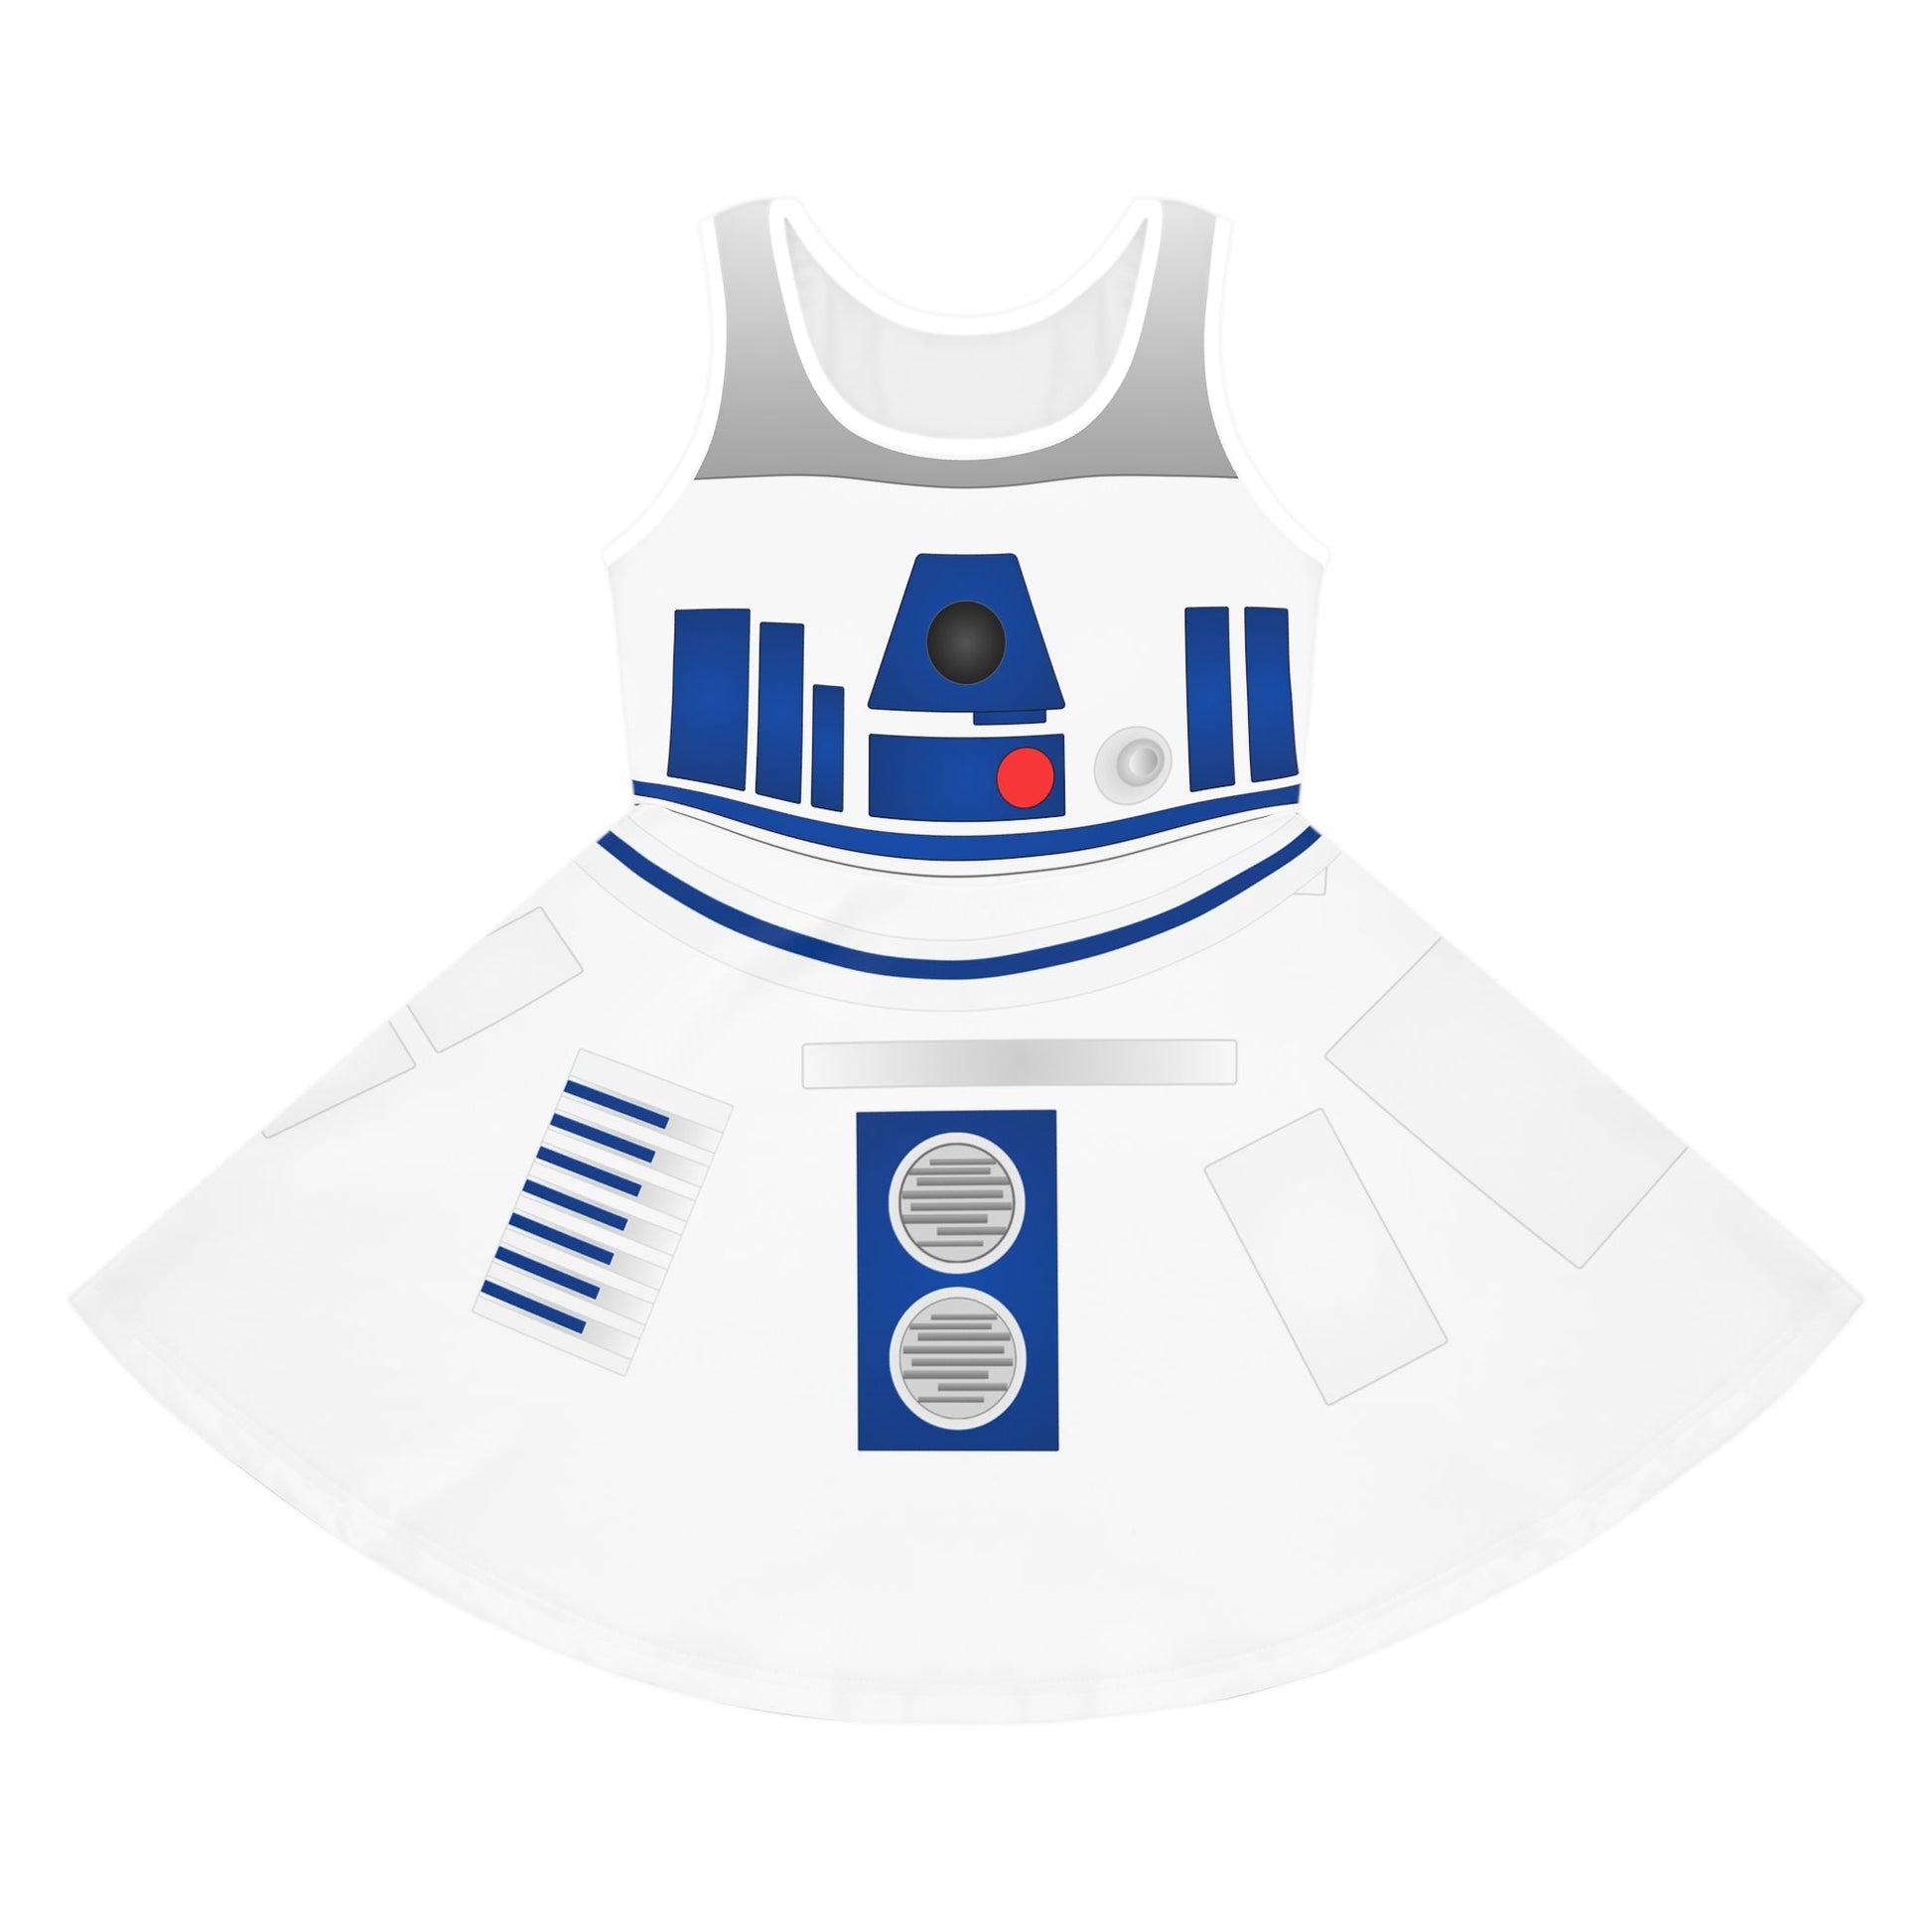 The Droid Girls' Sleeveless Sundress All Over PrintAOPAll Over PrintsWrong Lever Clothing